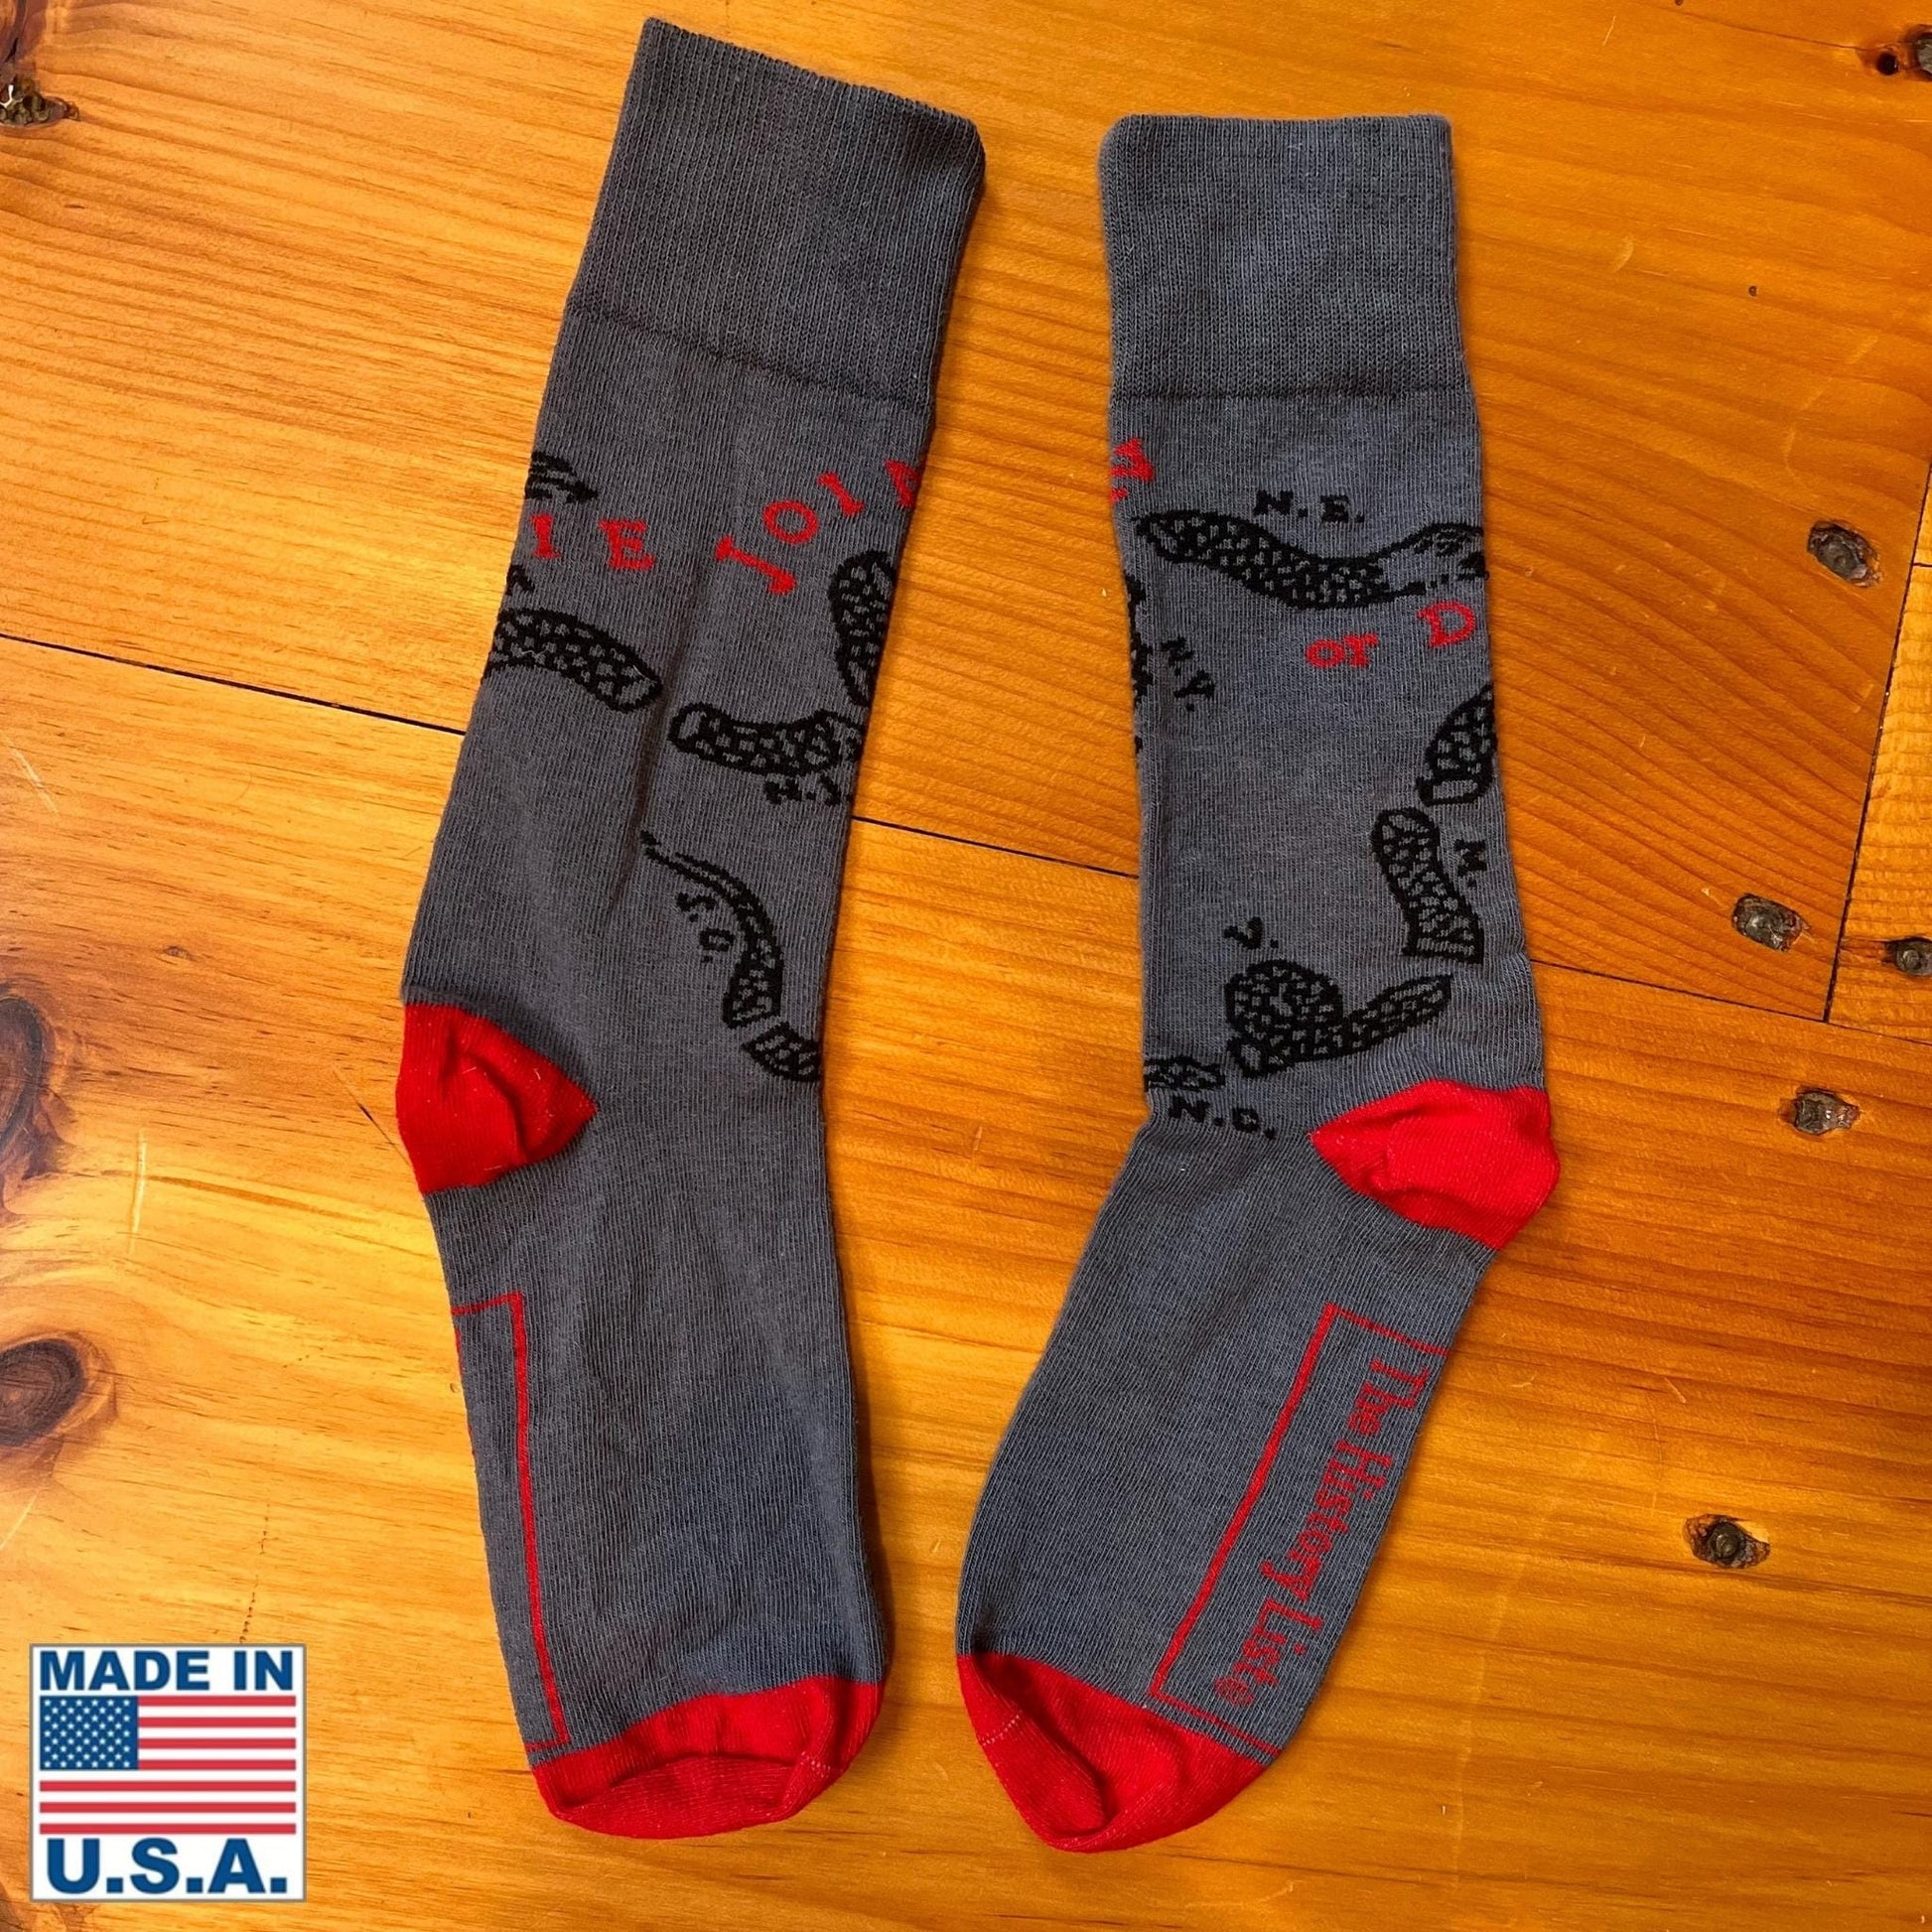 "Join or Die" Socks — Made in USA from The HIstory List store layed flat